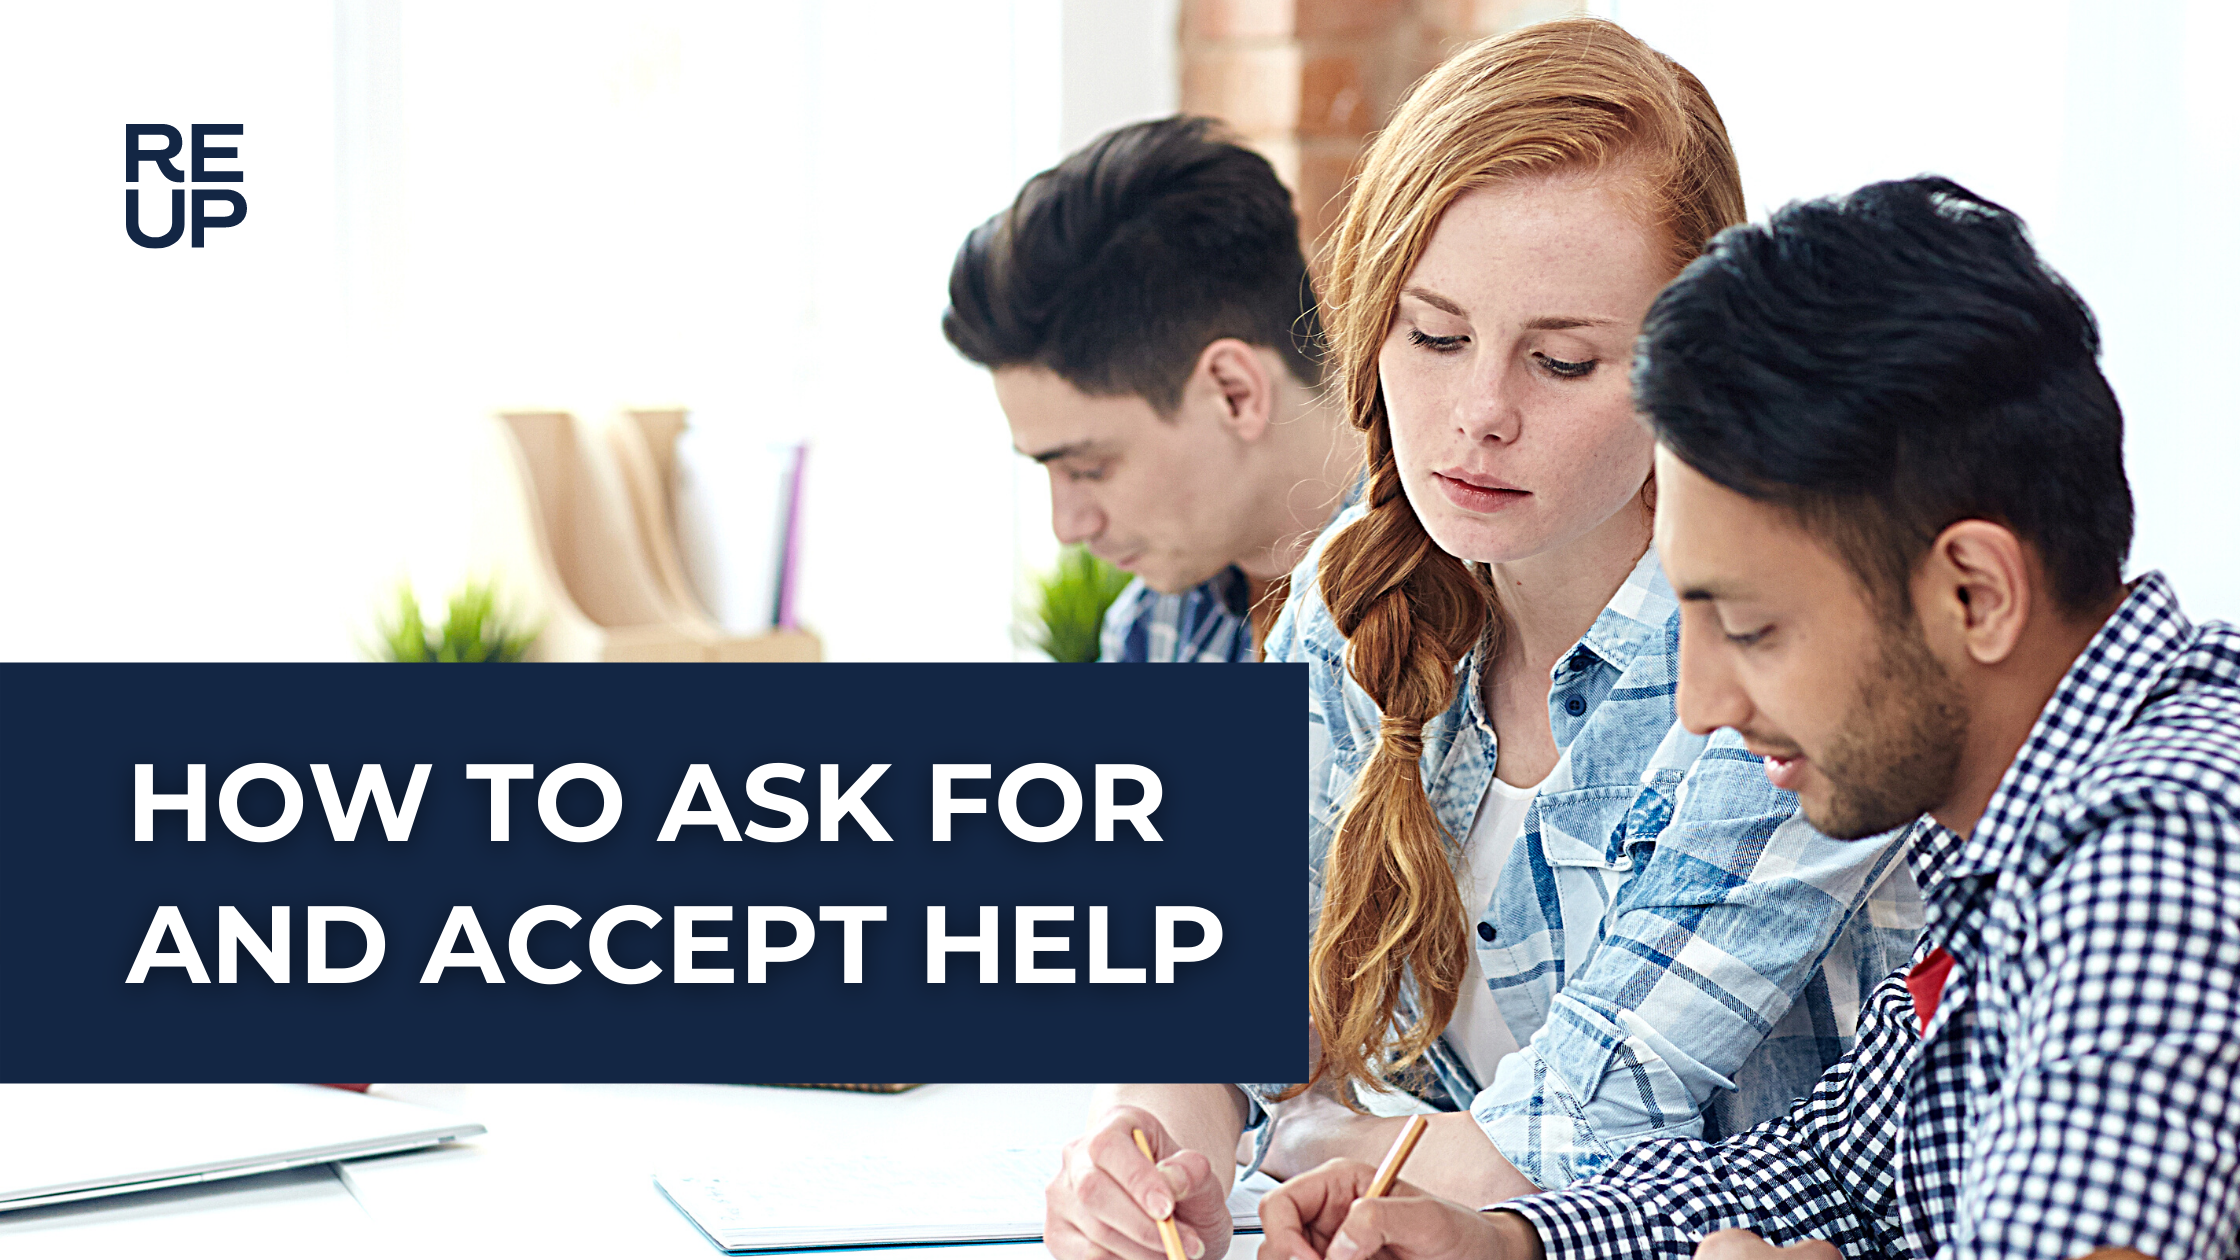 How to Ask for and Accept Help